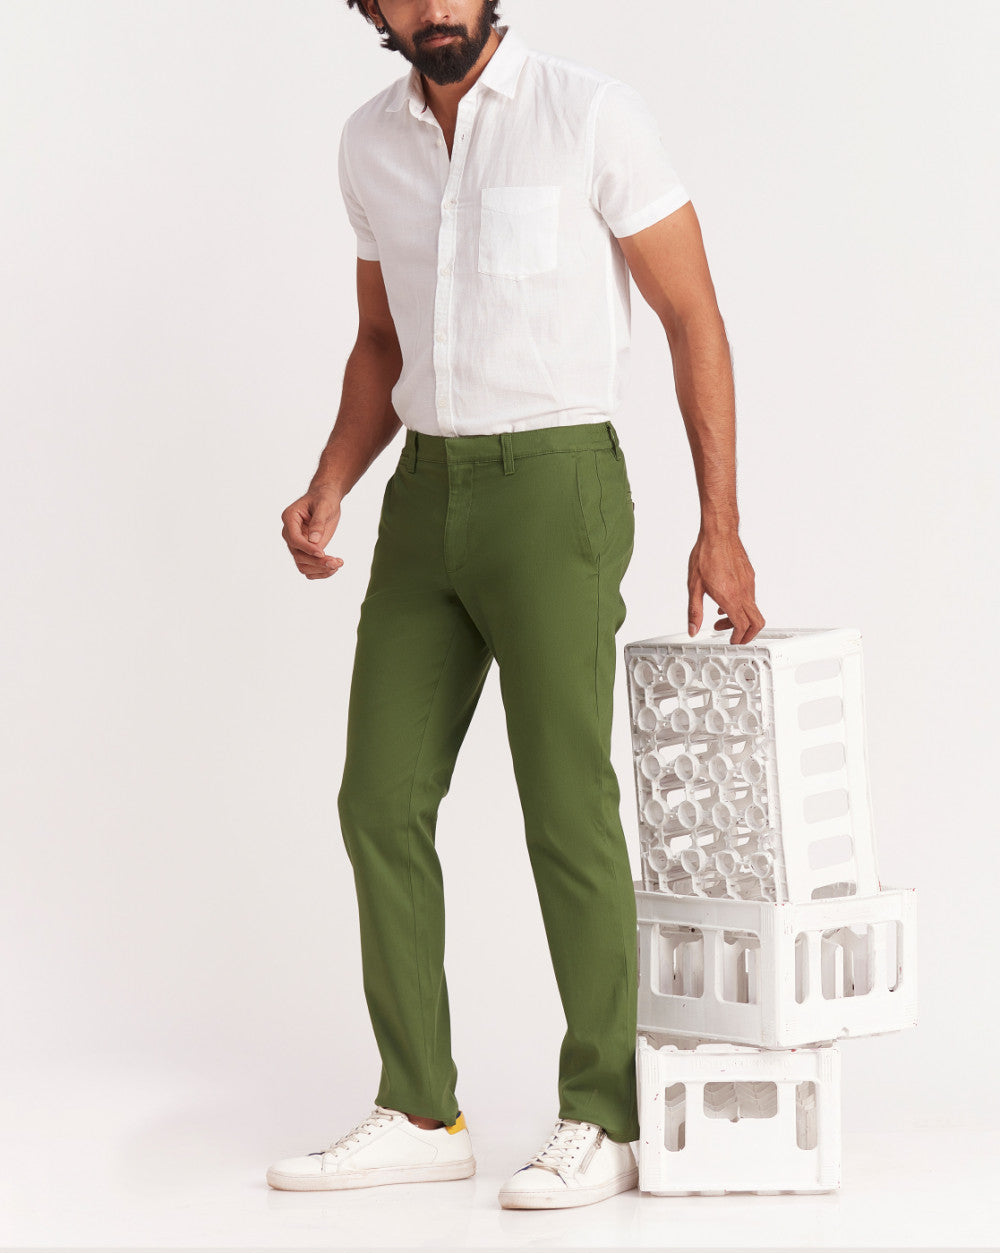 Slim Fit Elasticized Crossover Chinos - Chive Green